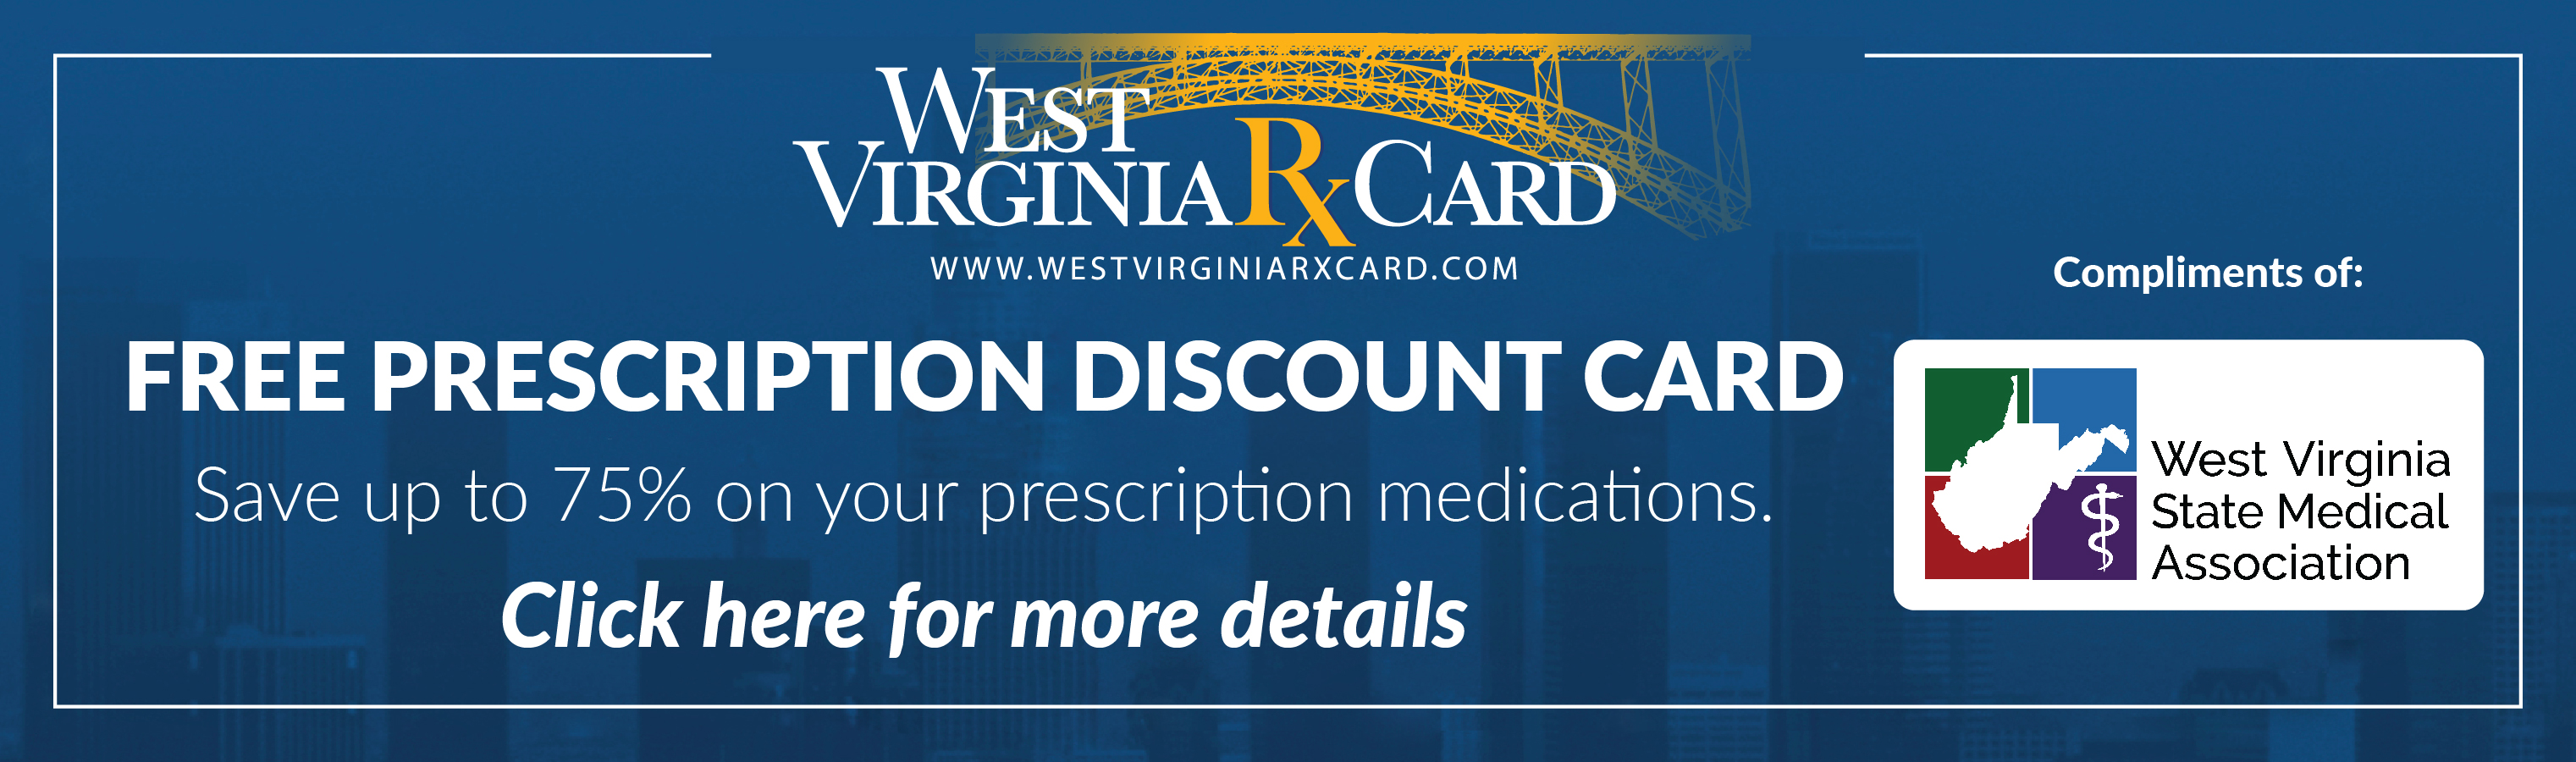 West Virginia State Medical Association- New Web Button-012